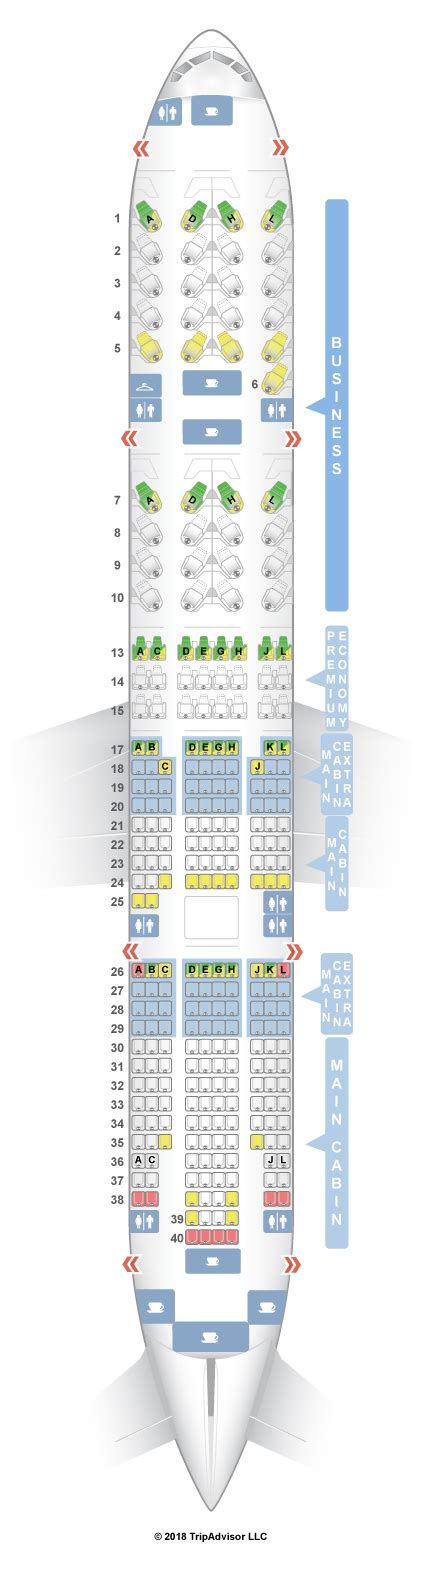 6 angle-flat seats. Economy. 29. 17. 387 standard seats. Food. The food available to passengers varies based on ticket class and flight length. Passengers may also special order food for babies, children's meals and vegetarian meals by emailing n4@nordwindairlines.ru at least 48 hours prior to departure.. 